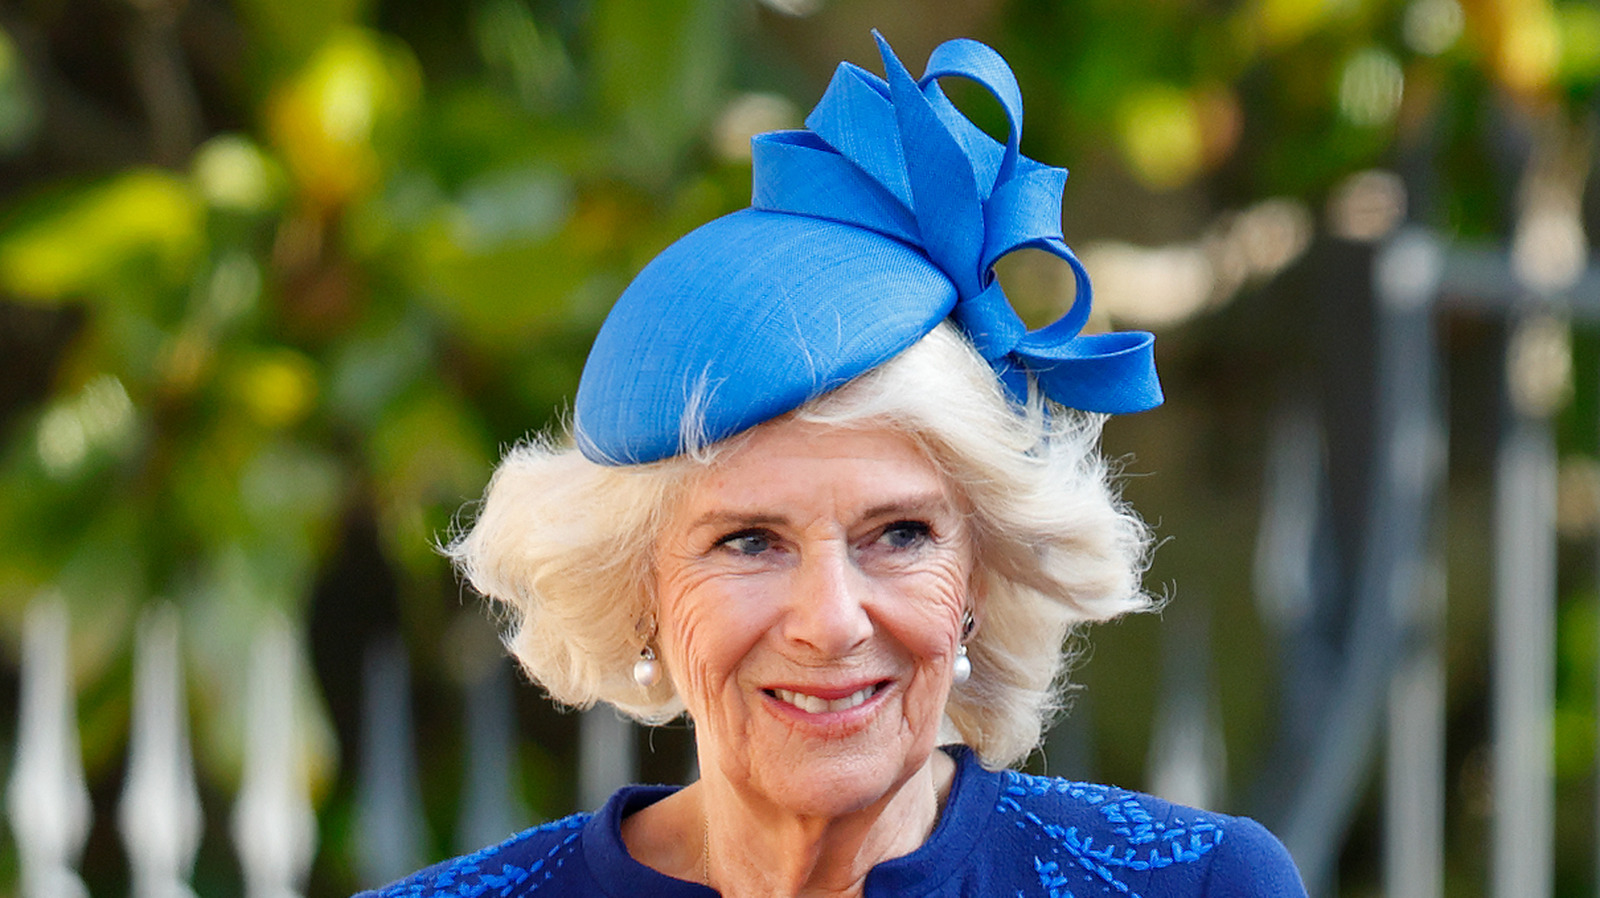 The Biggest Camilla Parker Bowles Rumors Through The Years - Internewscast